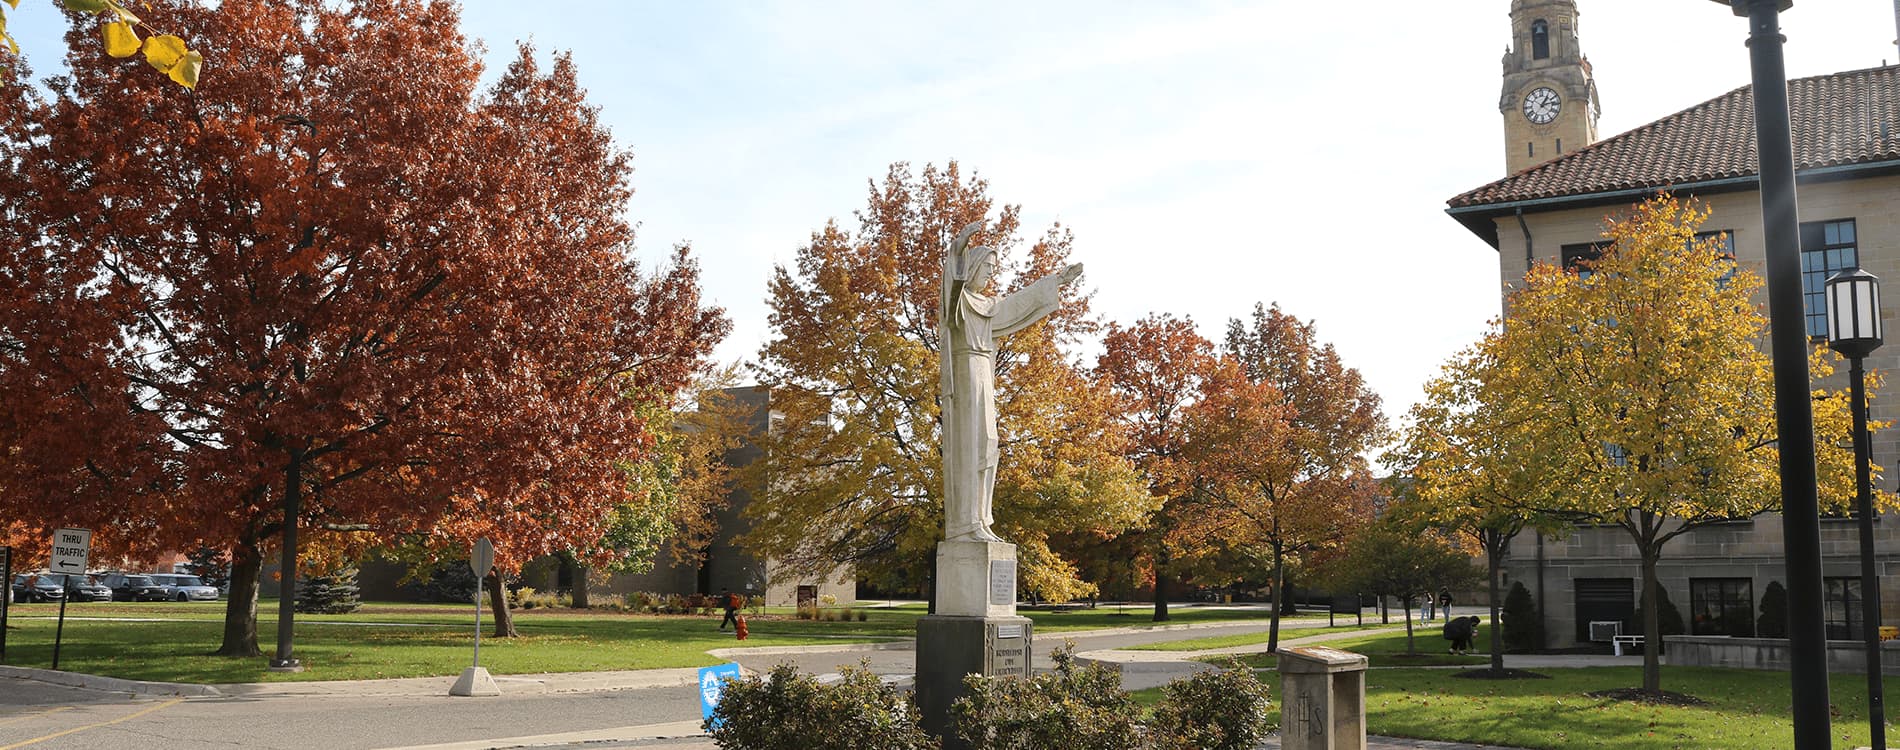 A photo of the Jesus statue on the McNichols Campus, with the Clocktower and students visible in the background.